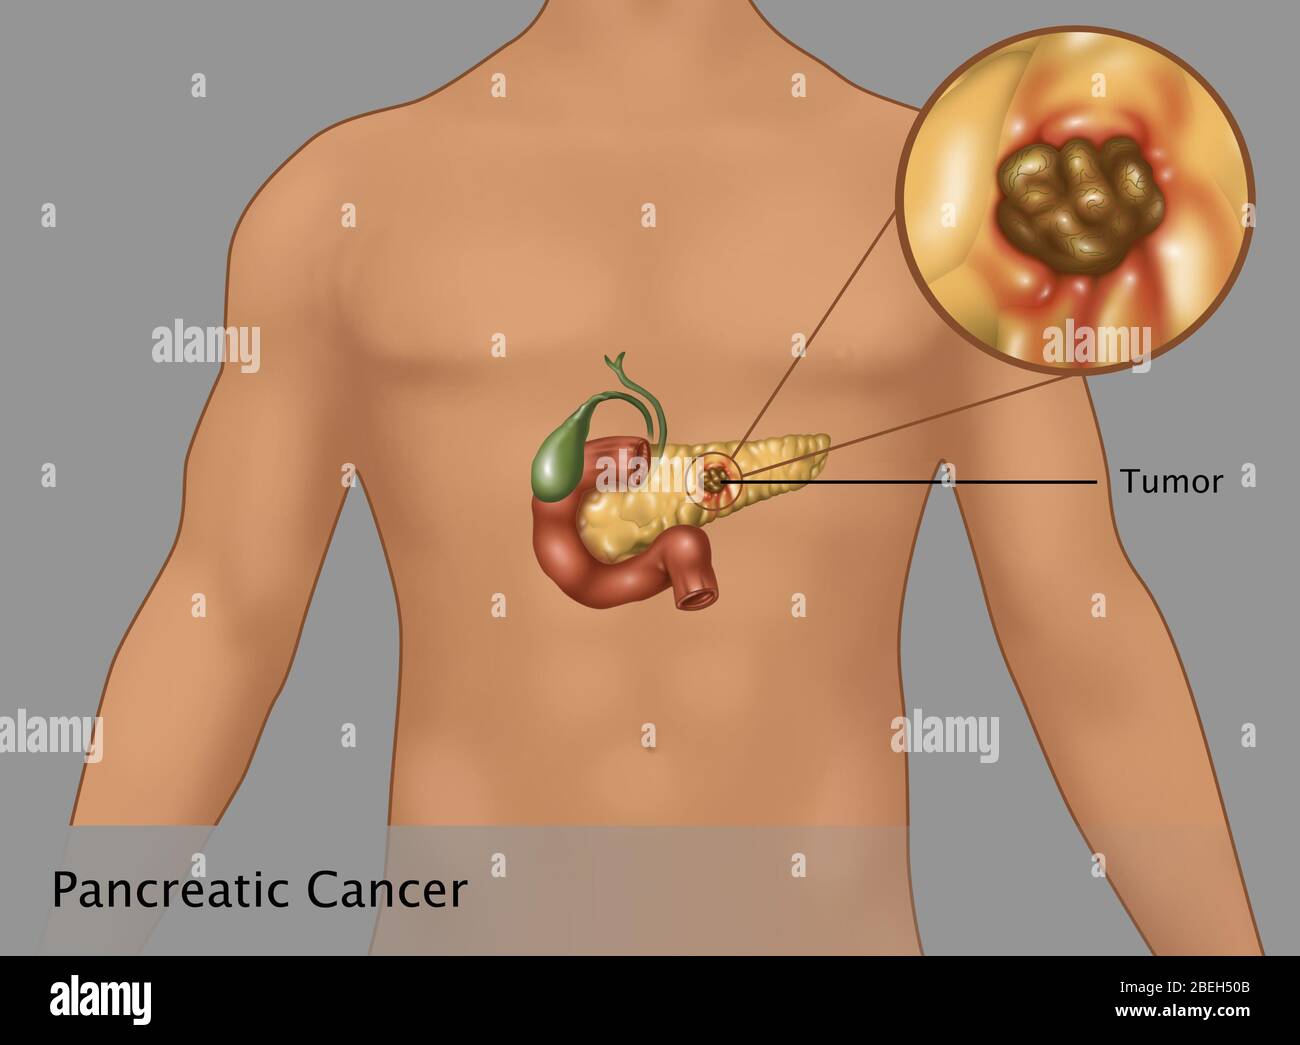 Illustration of pancreatic cancer inset in an outline of a male figure. At center of the pancreas is the tumor (brown area). Also present are the gallbladder (green) and duodenum (burnt red). Stock Photo